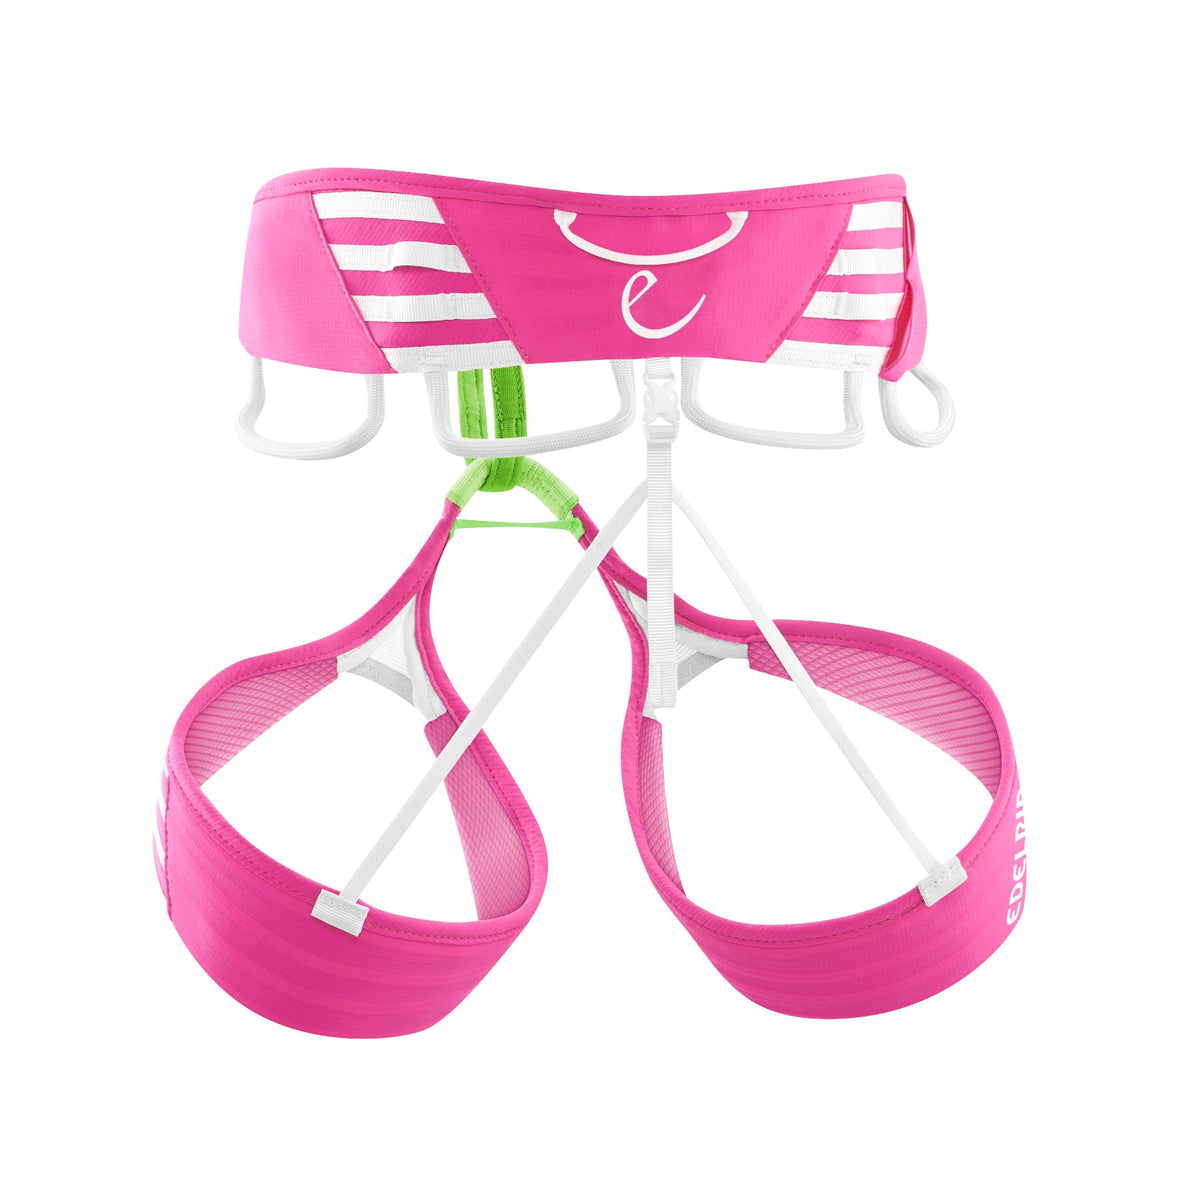 Edelrid Ace Harness, Neon Pink, back